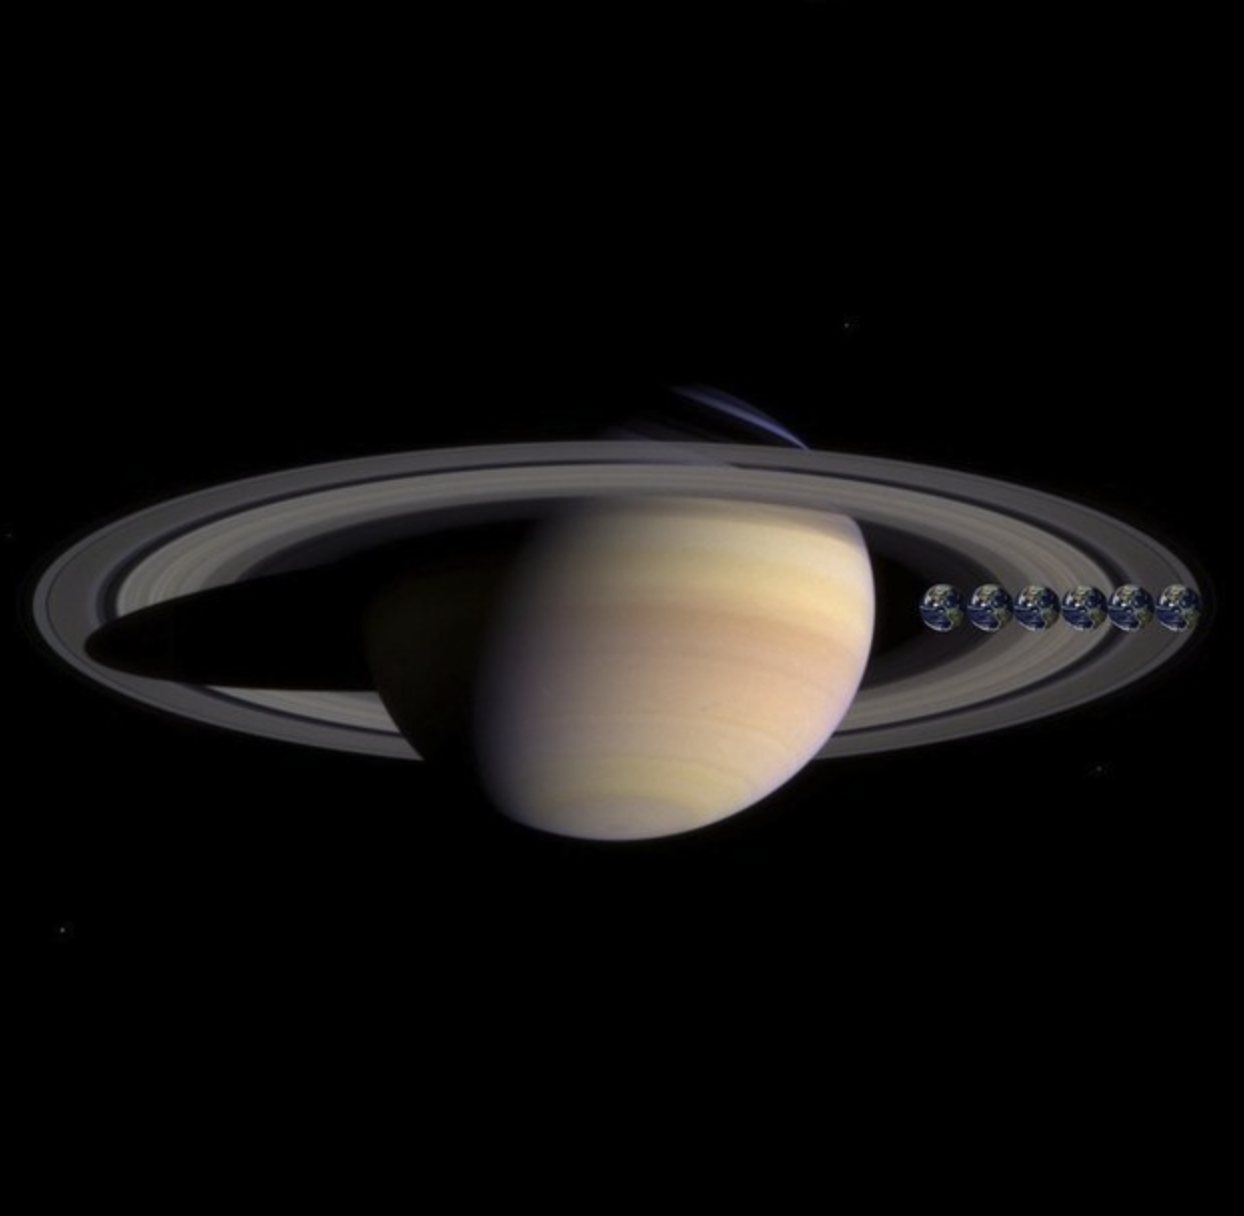 Saturn and its rings with Earth, Venus, and Mars aligned for a cosmic portrait